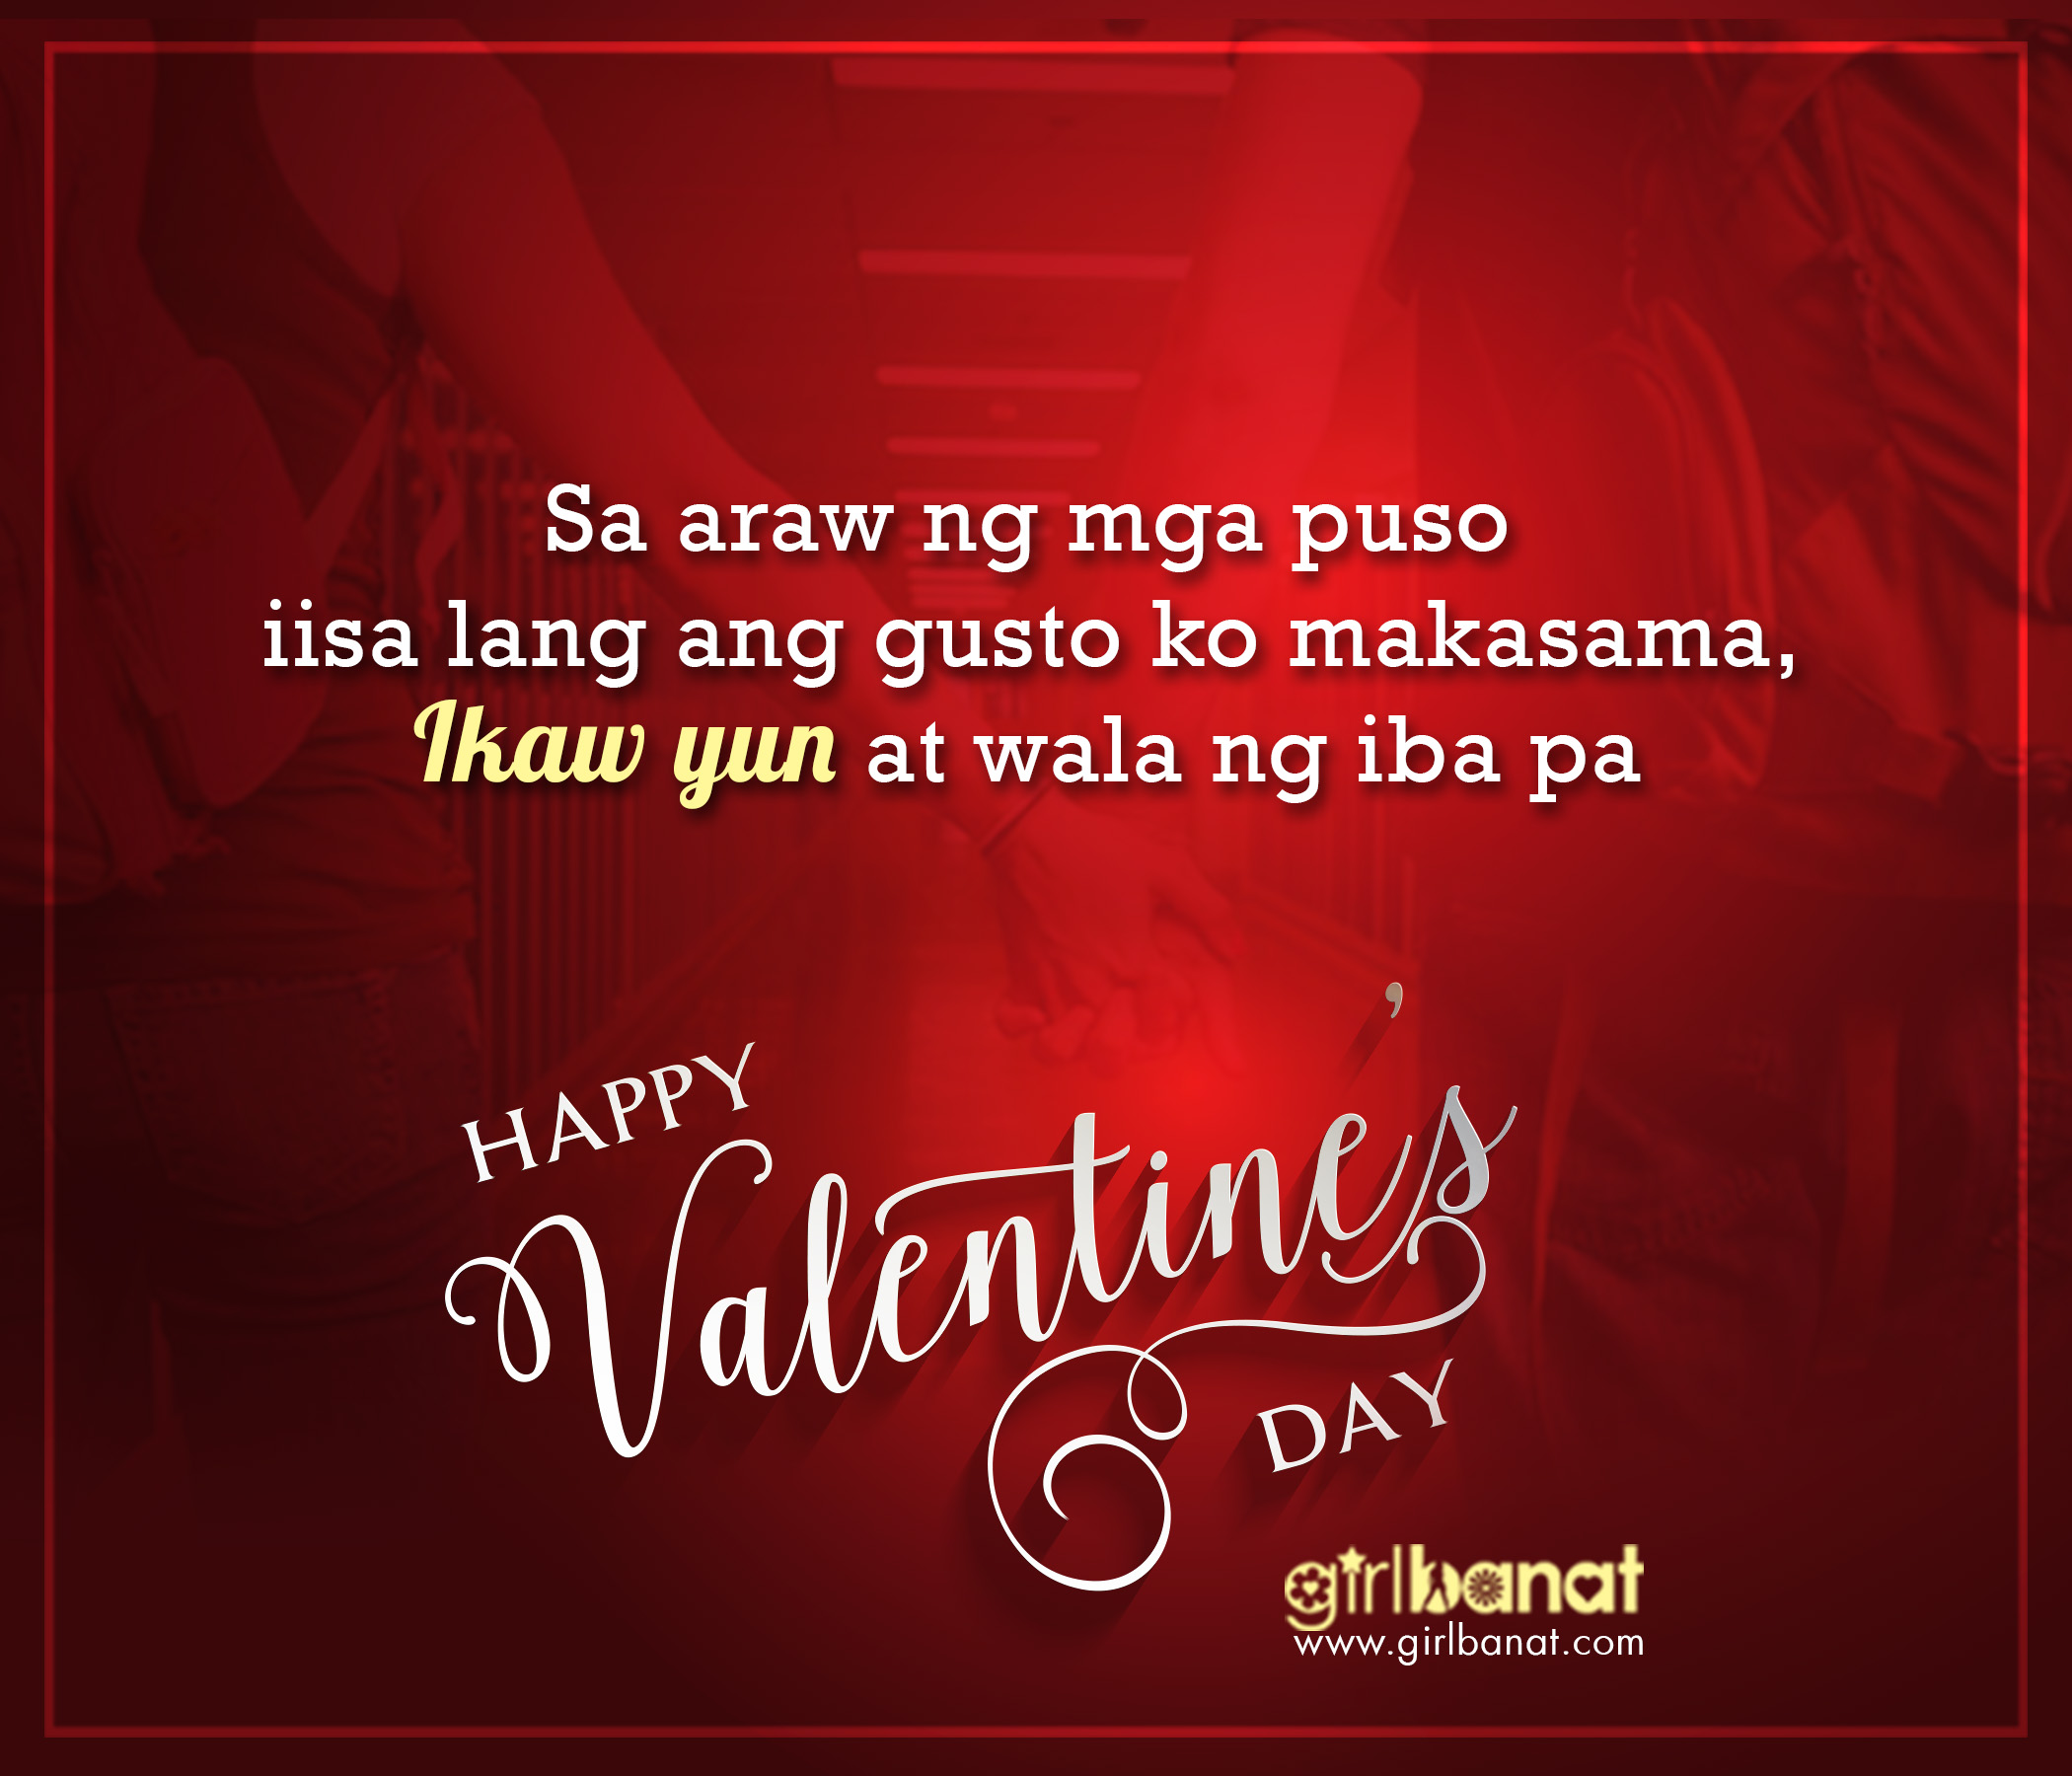 Tagalog Valentines Day Quotes www GirlBanat com